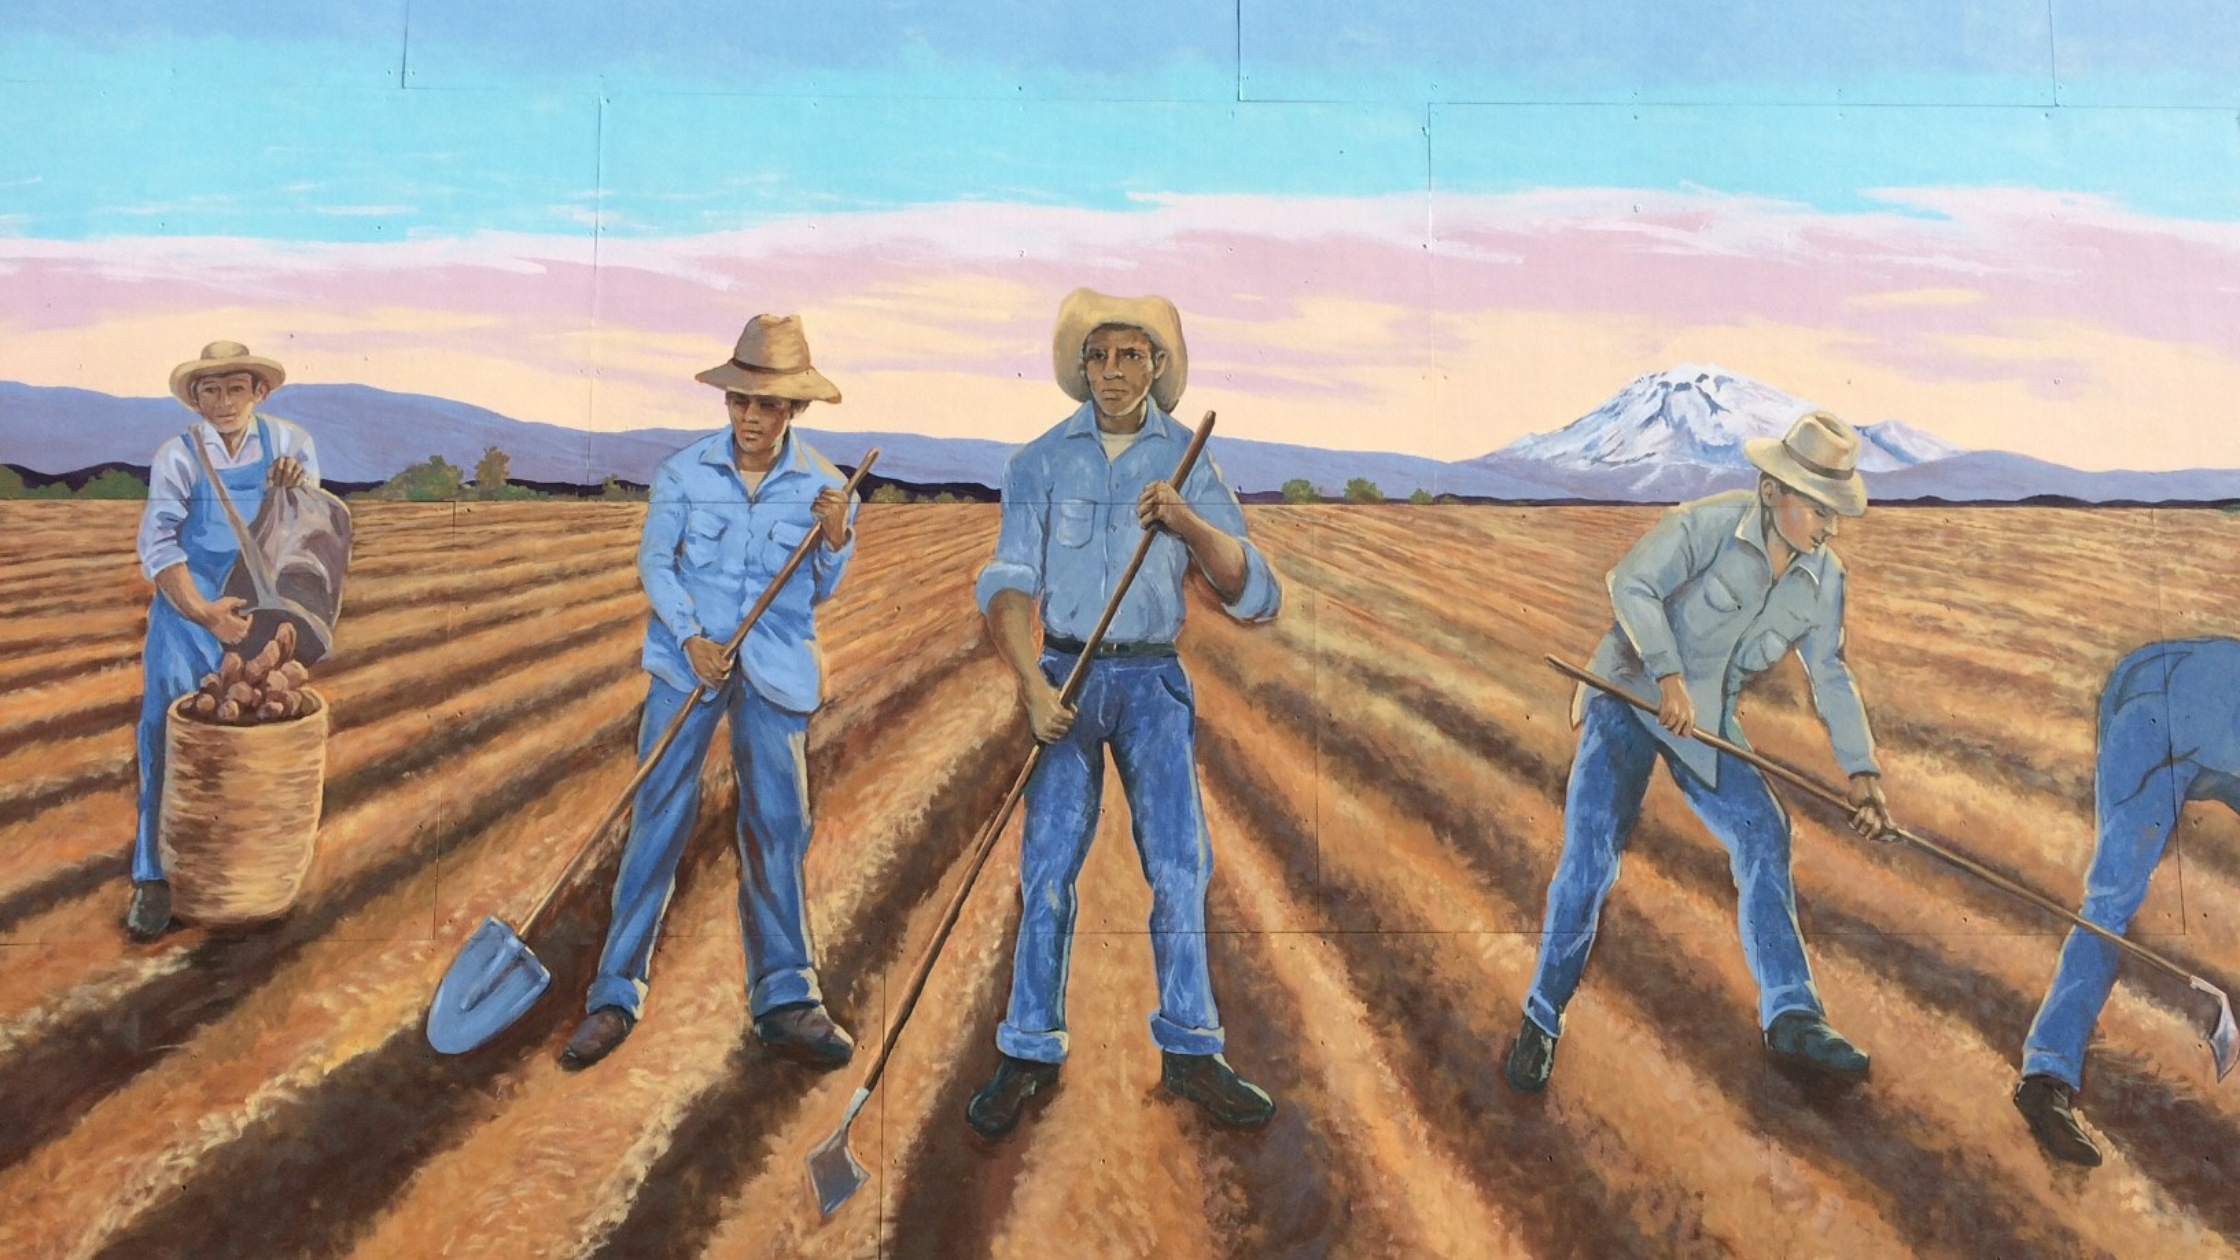 A mural in Toppenish (Yakima County) photographed by one of our team members during a community visit in 2018.